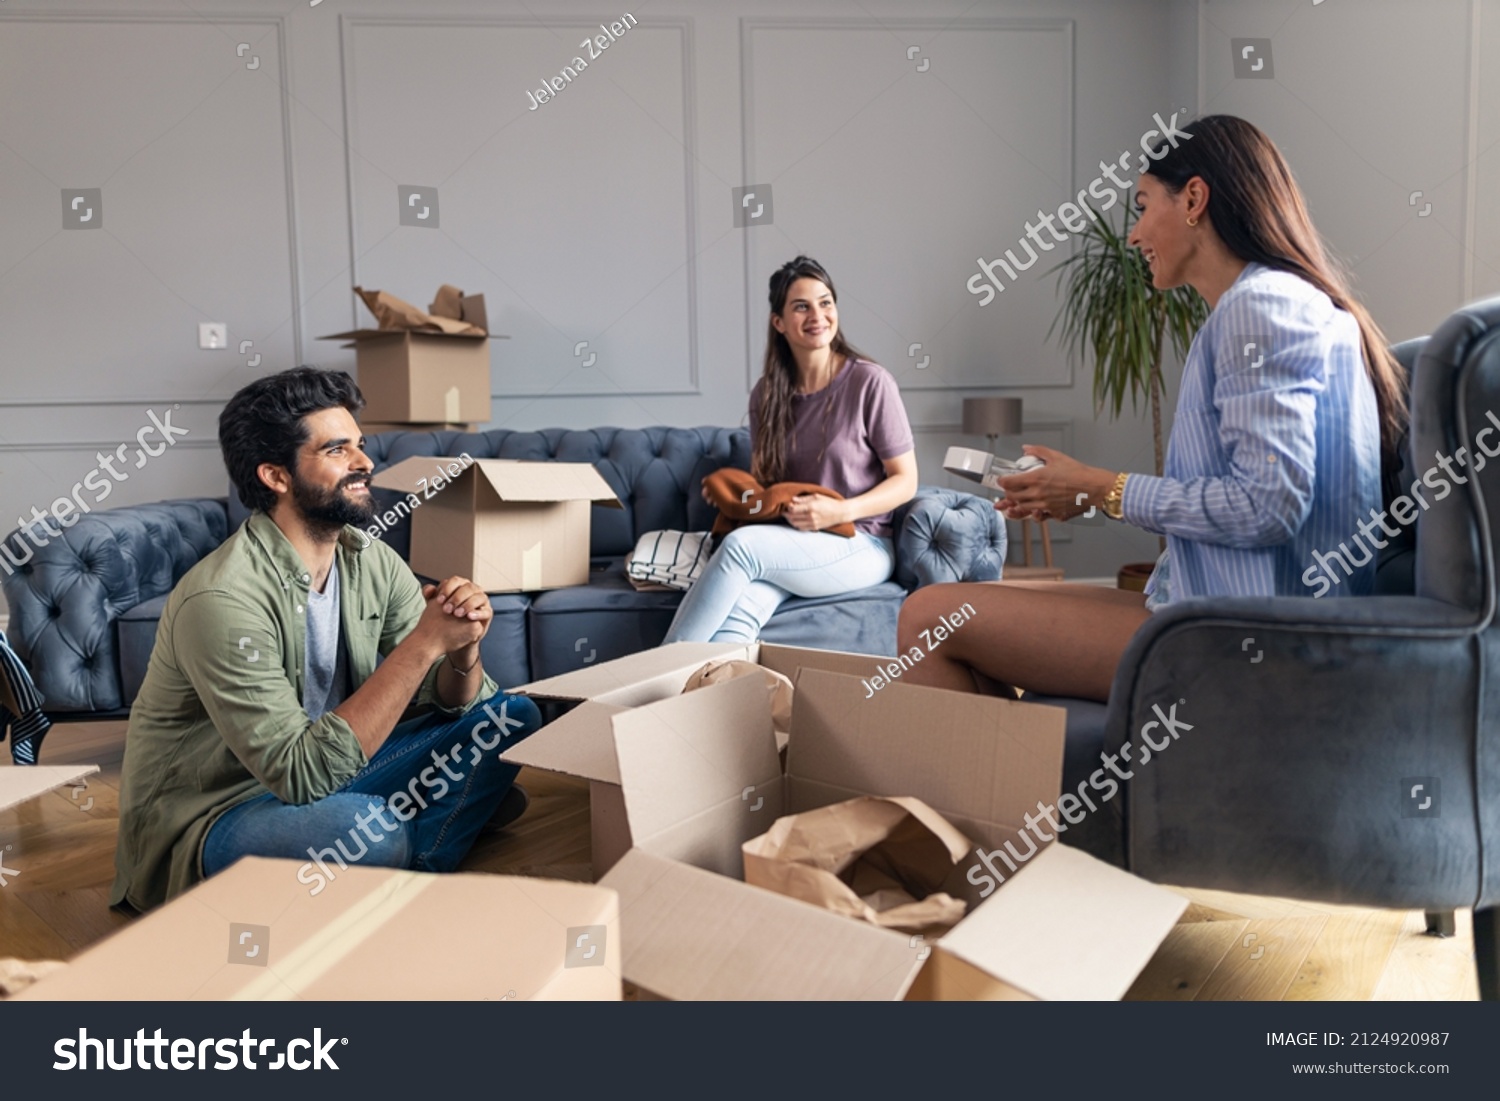 Friends sitting and talking in their new apartment while unpacking their things from cardboard box. #2124920987